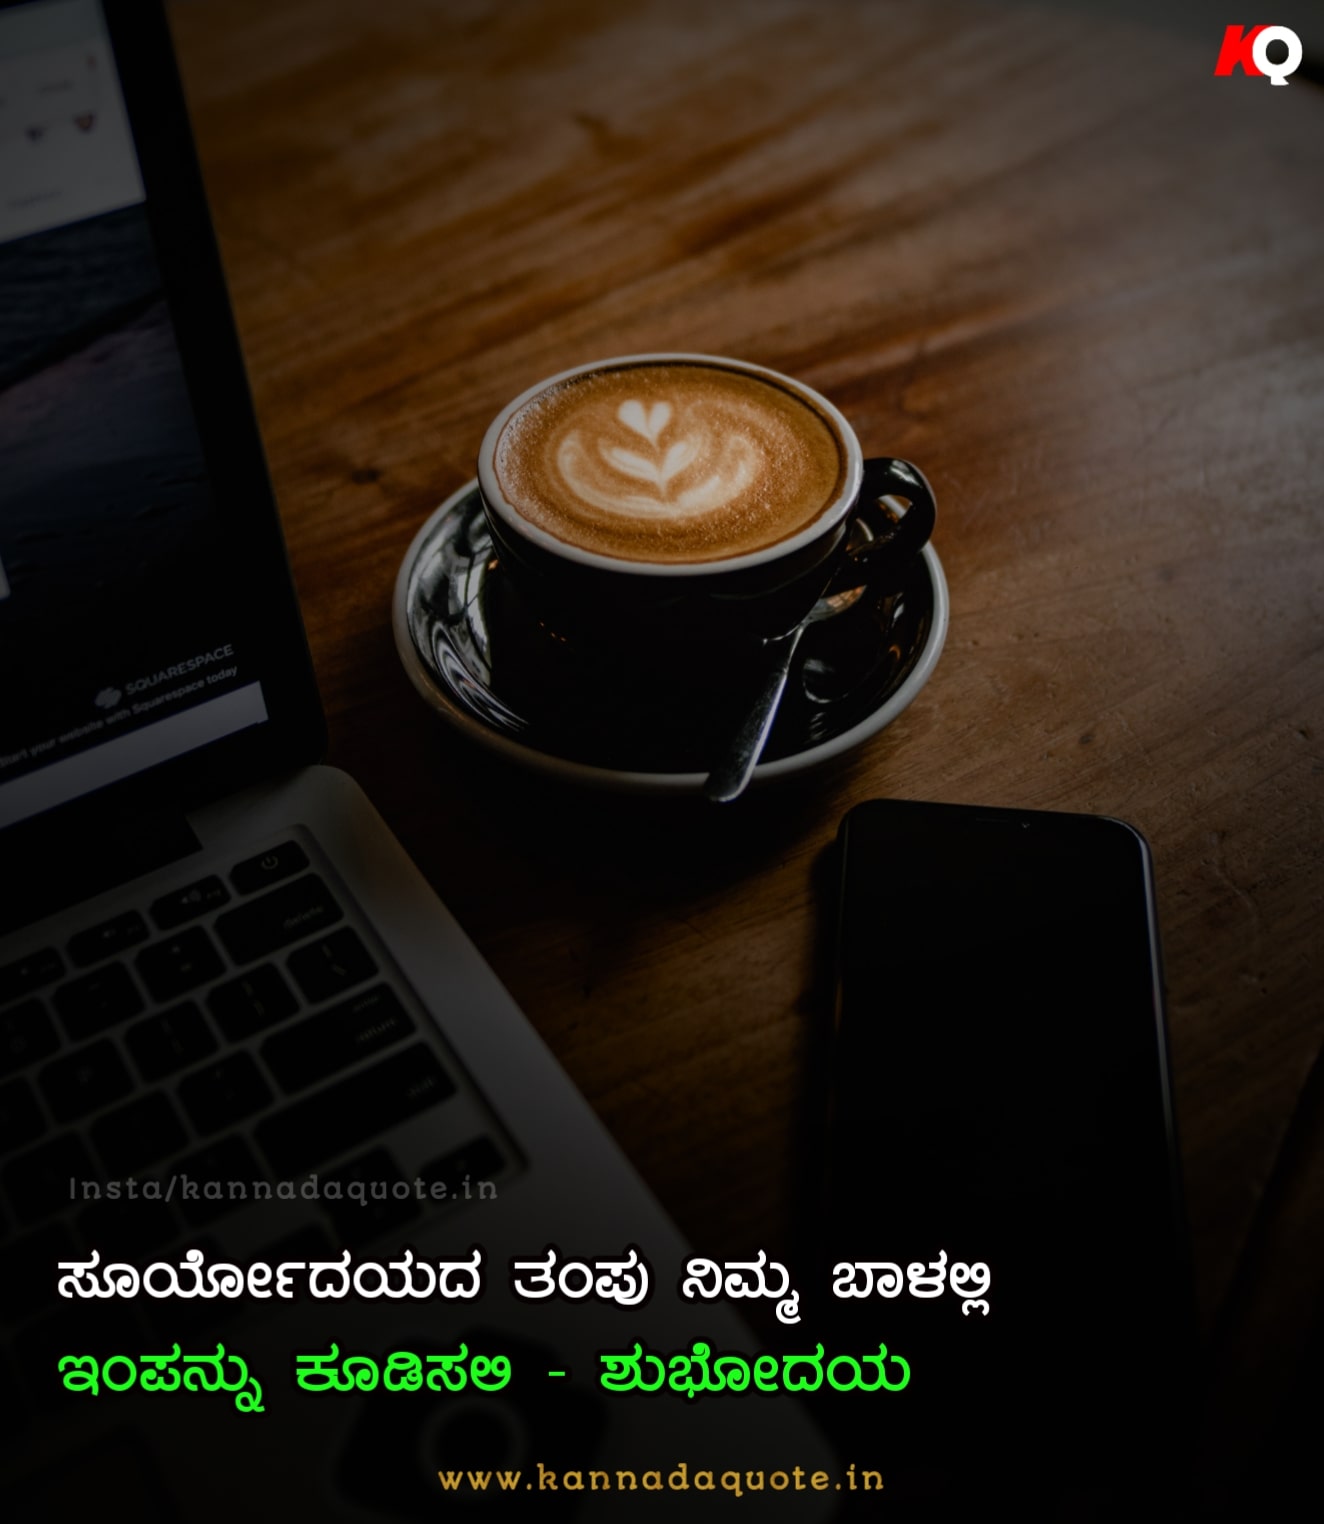 Good morning quotes in Kannada with coffee image